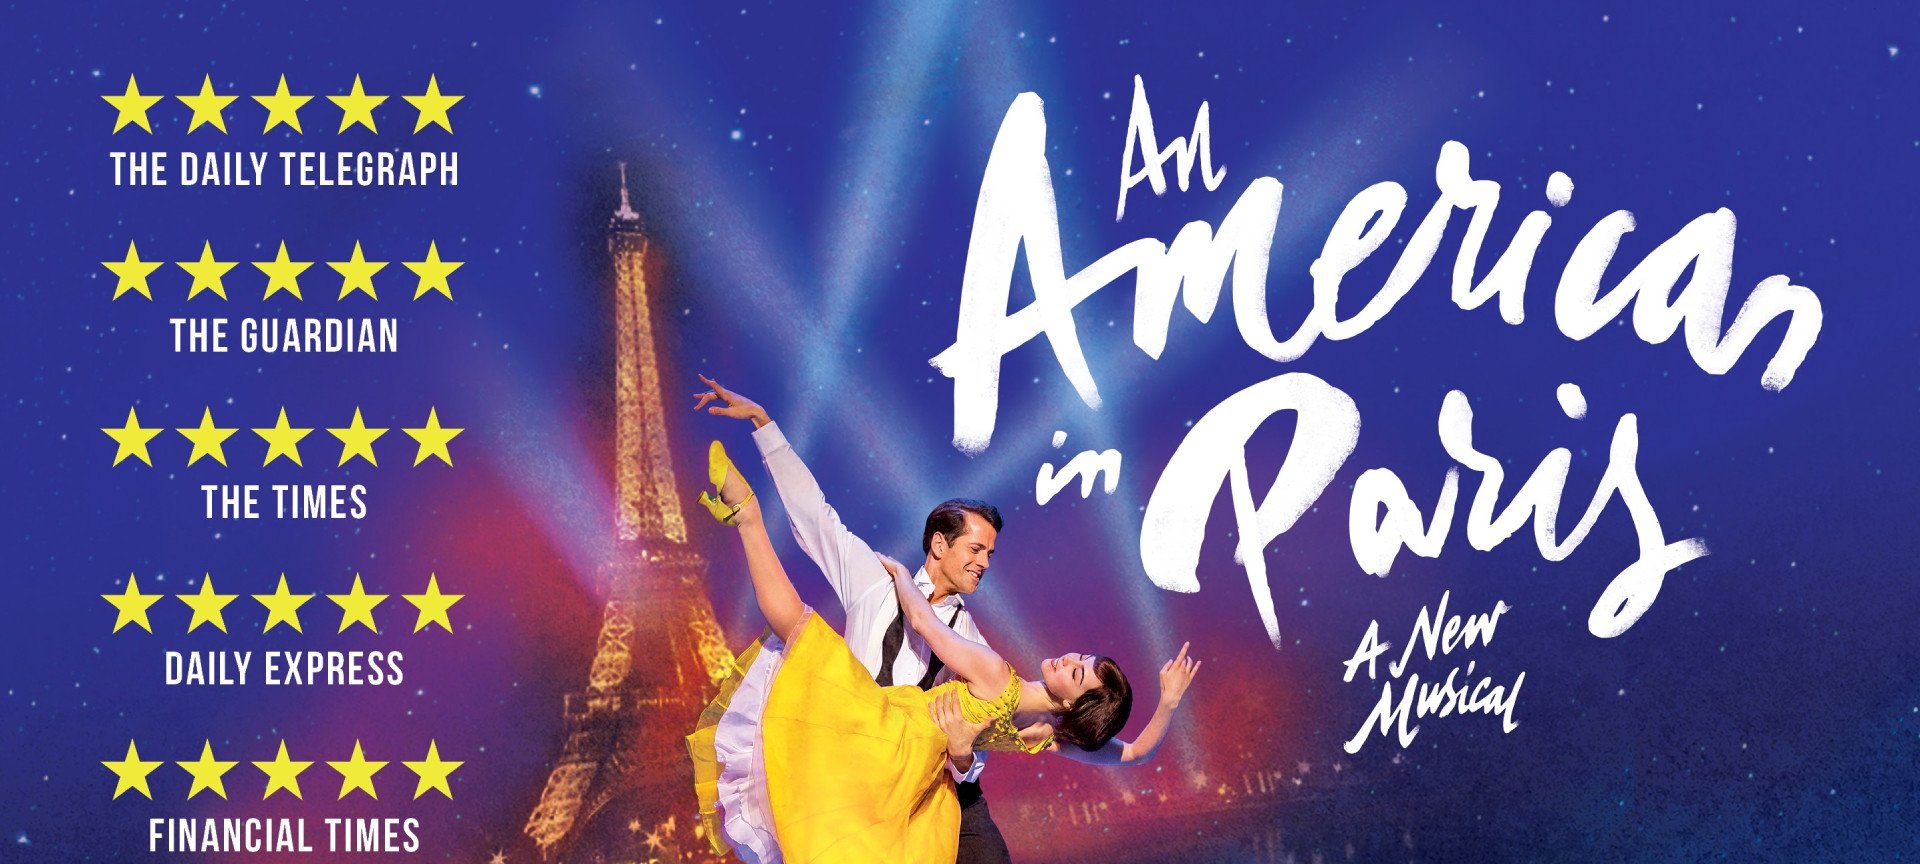 AN AMERICAN IN PARIS THE MUSICAL – Event Screening